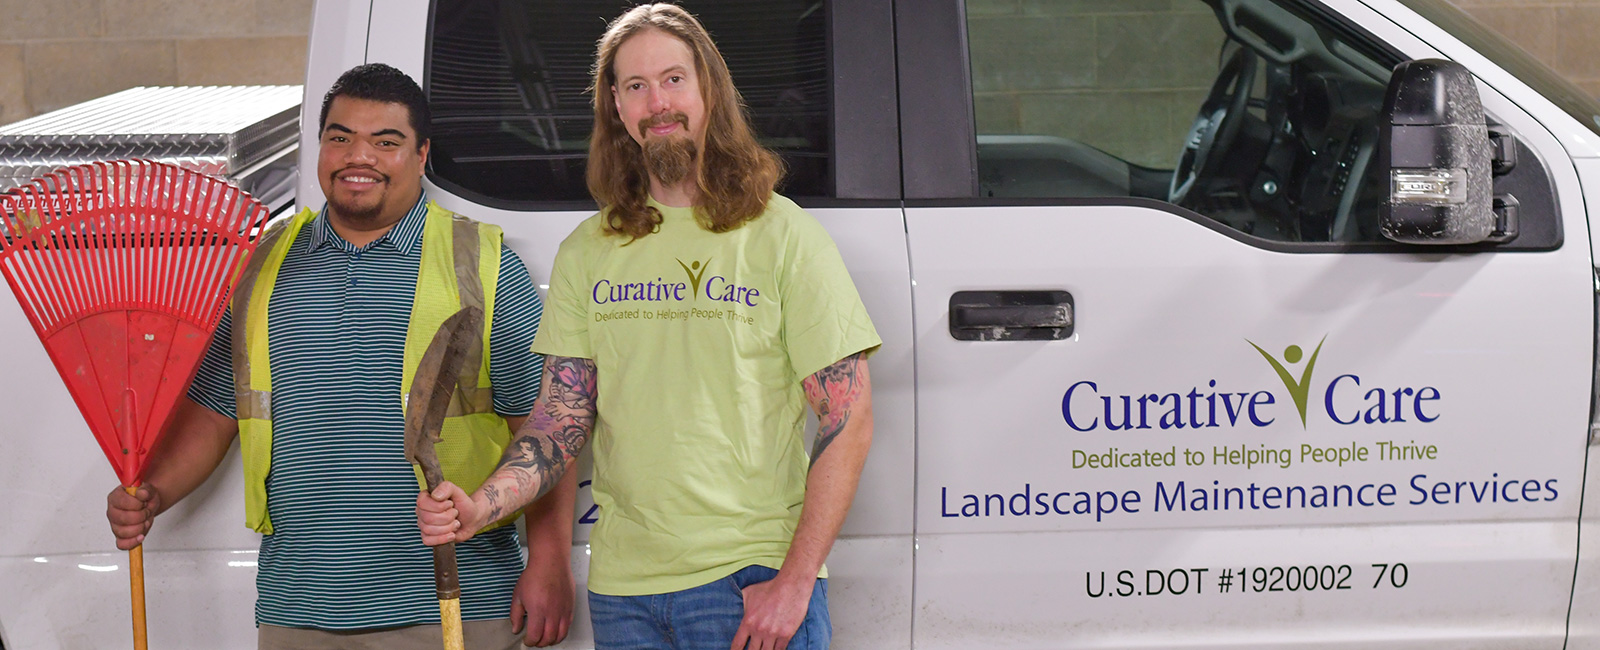 Adult client standing next to landscape supervisor, both holding lawn equipment